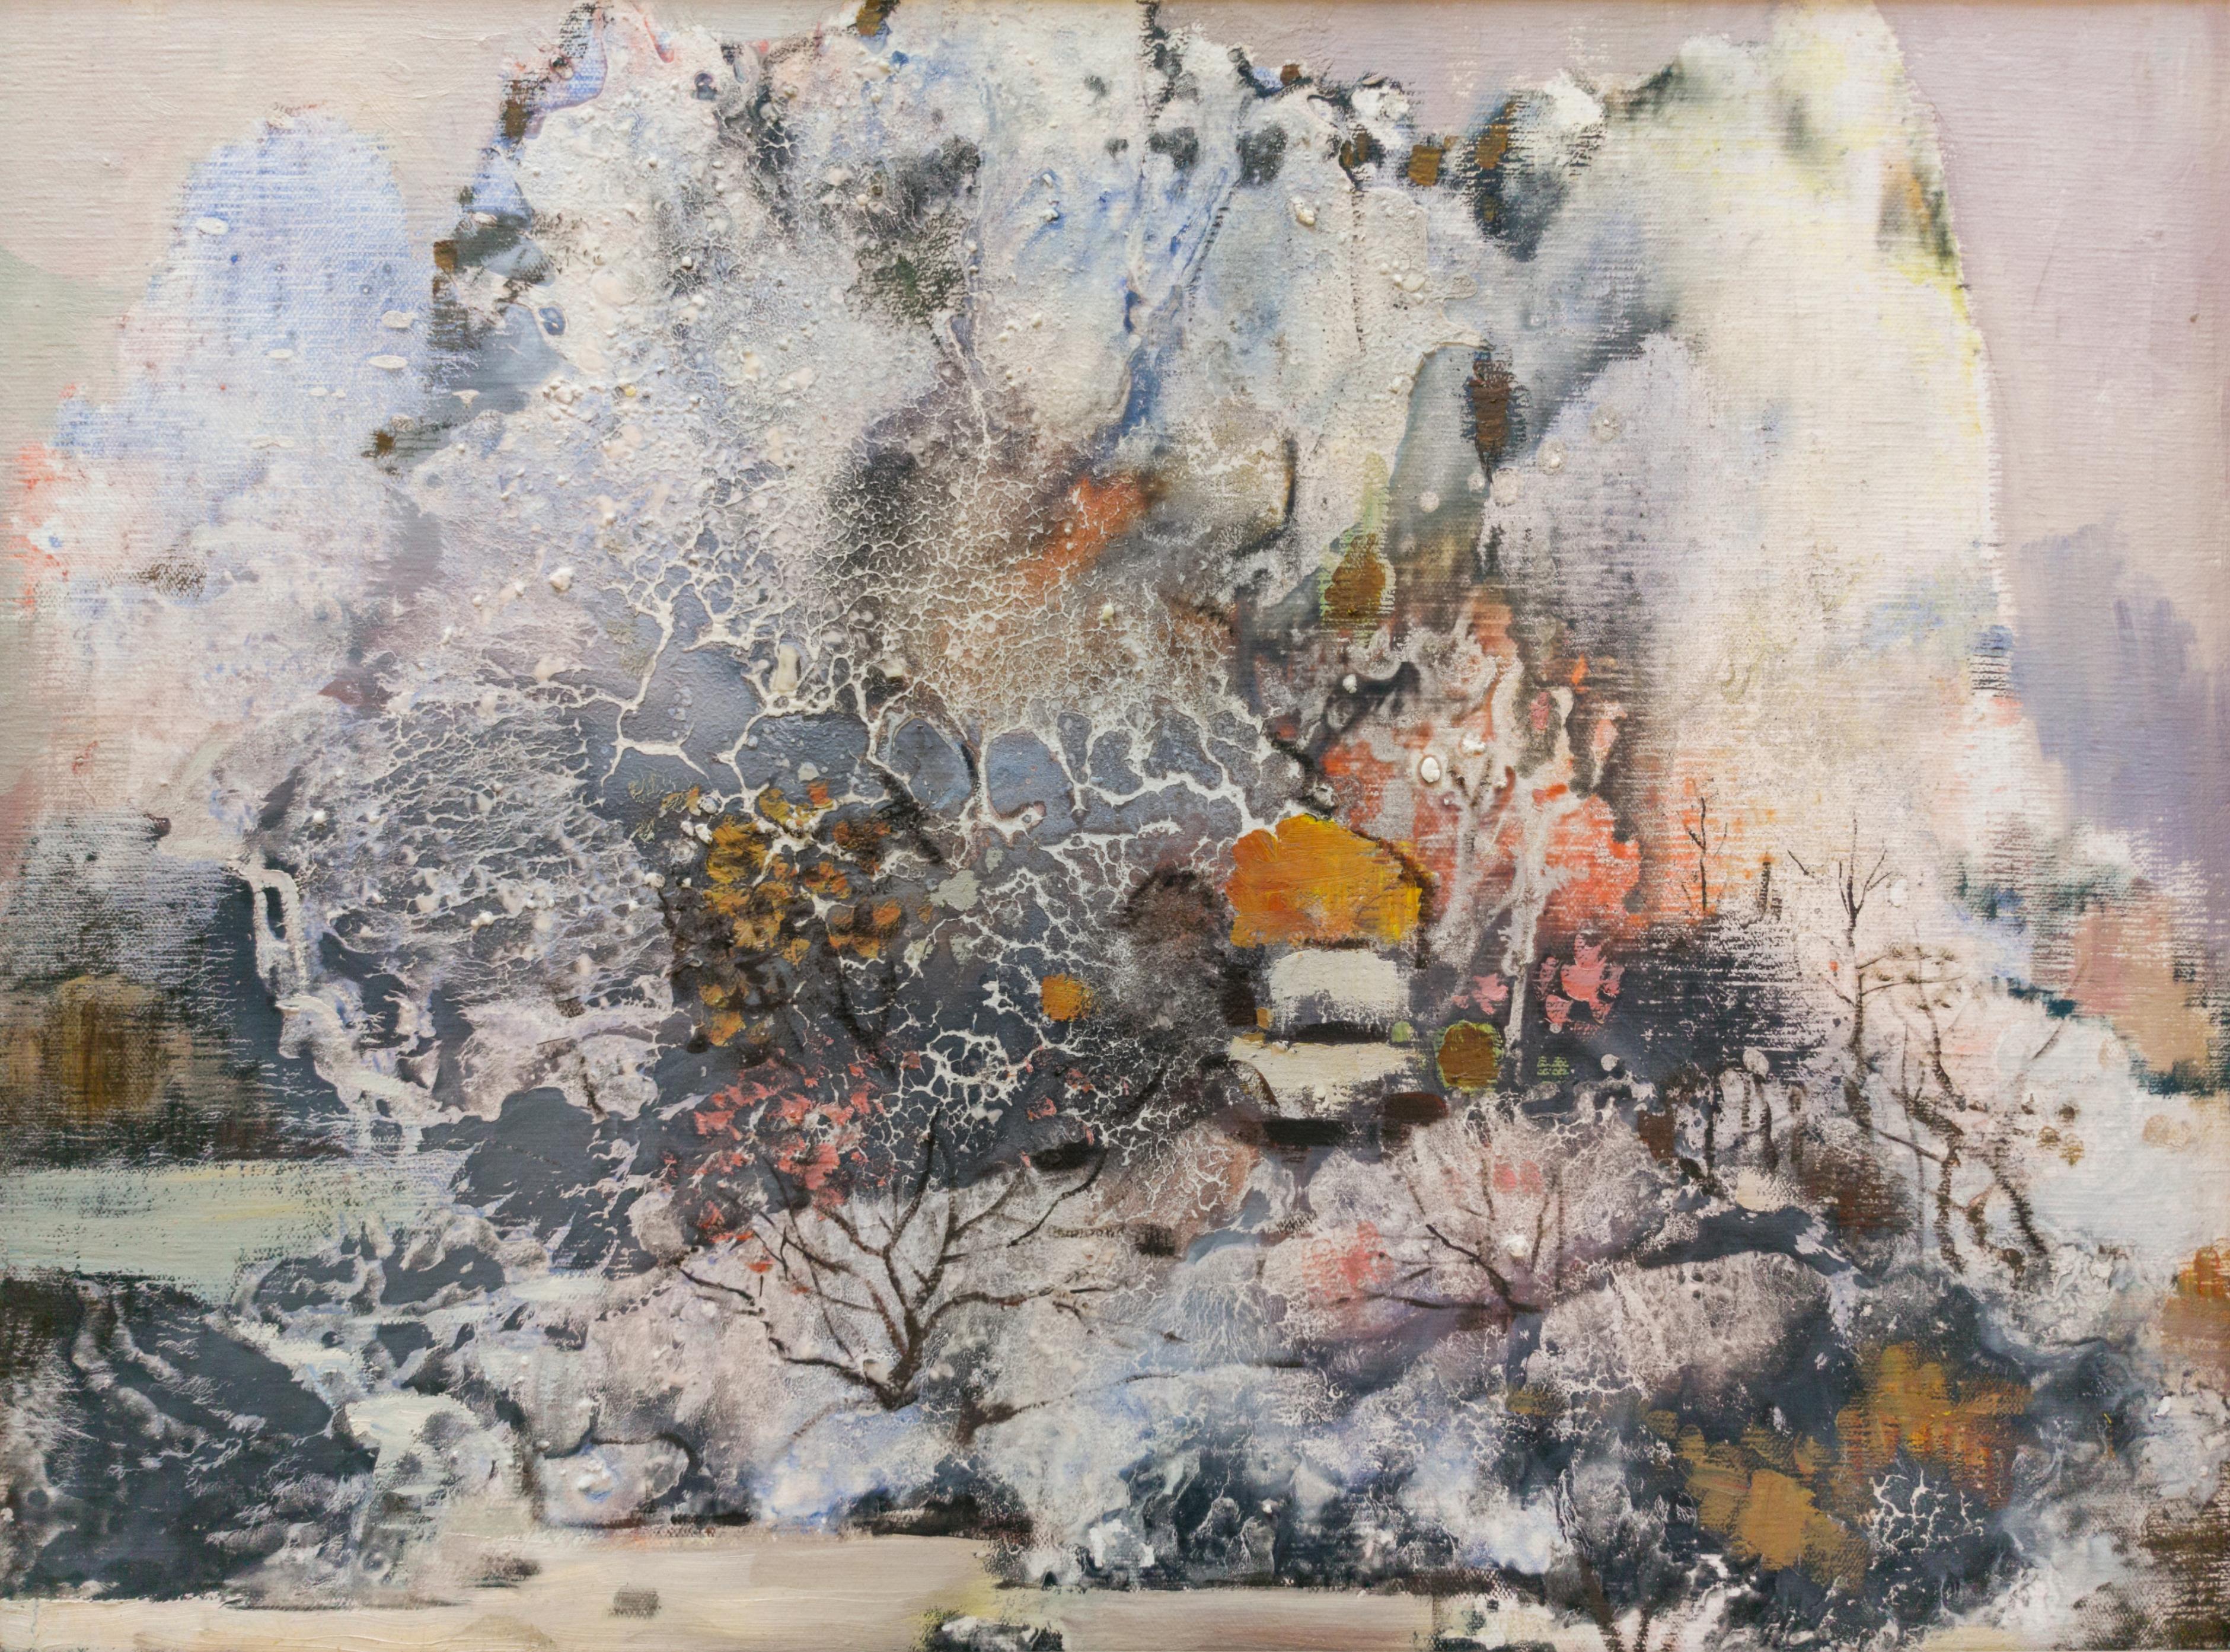 Chinese Contemporary Art by Diao Qing-Chun - Series The Landscape No.9